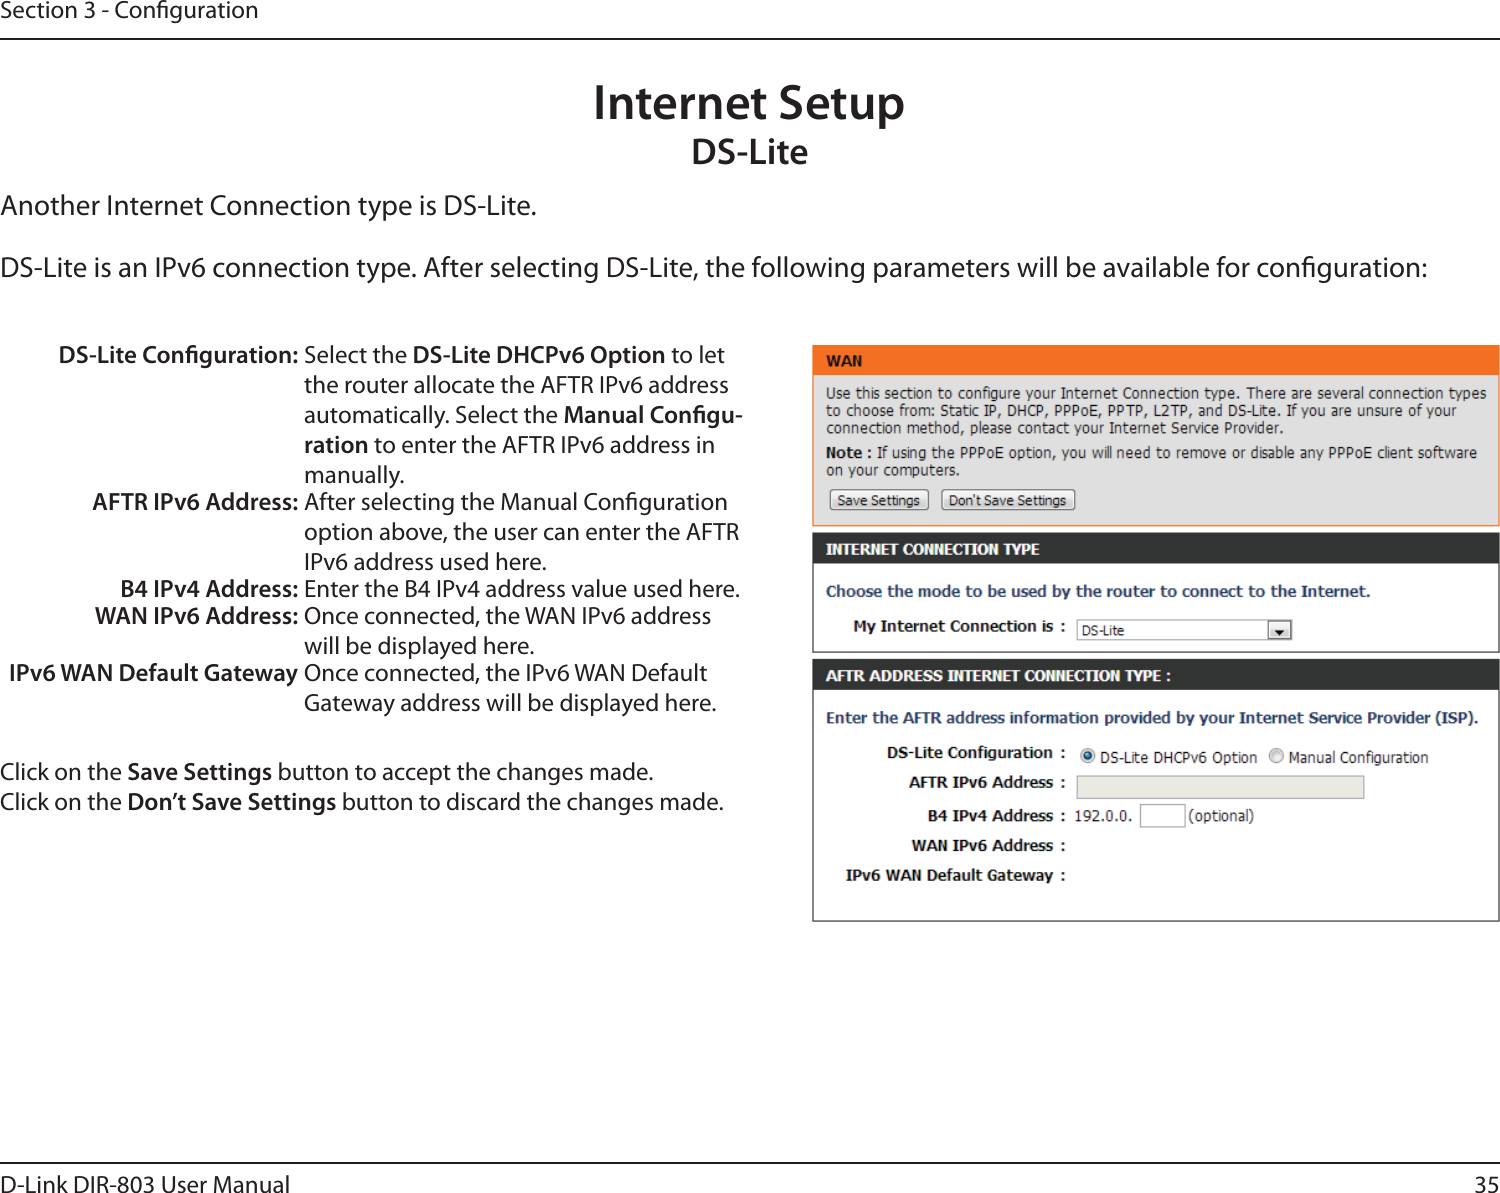 35D-Link DIR-803 User ManualSection 3 - CongurationInternet SetupDS-LiteAnother Internet Connection type is DS-Lite.DS-Lite is an IPv6 connection type. After selecting DS-Lite, the following parameters will be available for conguration:DS-Lite Conguration: Select the DS-Lite DHCPv6 Option to let the router allocate the AFTR IPv6 address automatically. Select the Manual Congu-ration to enter the AFTR IPv6 address in manually.AFTR IPv6 Address: After selecting the Manual Conguration option above, the user can enter the AFTR IPv6 address used here.B4 IPv4 Address: Enter the B4 IPv4 address value used here.WAN IPv6 Address: Once connected, the WAN IPv6 address will be displayed here.IPv6 WAN Default Gateway Once connected, the IPv6 WAN Default Gateway address will be displayed here.Click on the Save Settings button to accept the changes made.Click on the Don’t Save Settings button to discard the changes made.